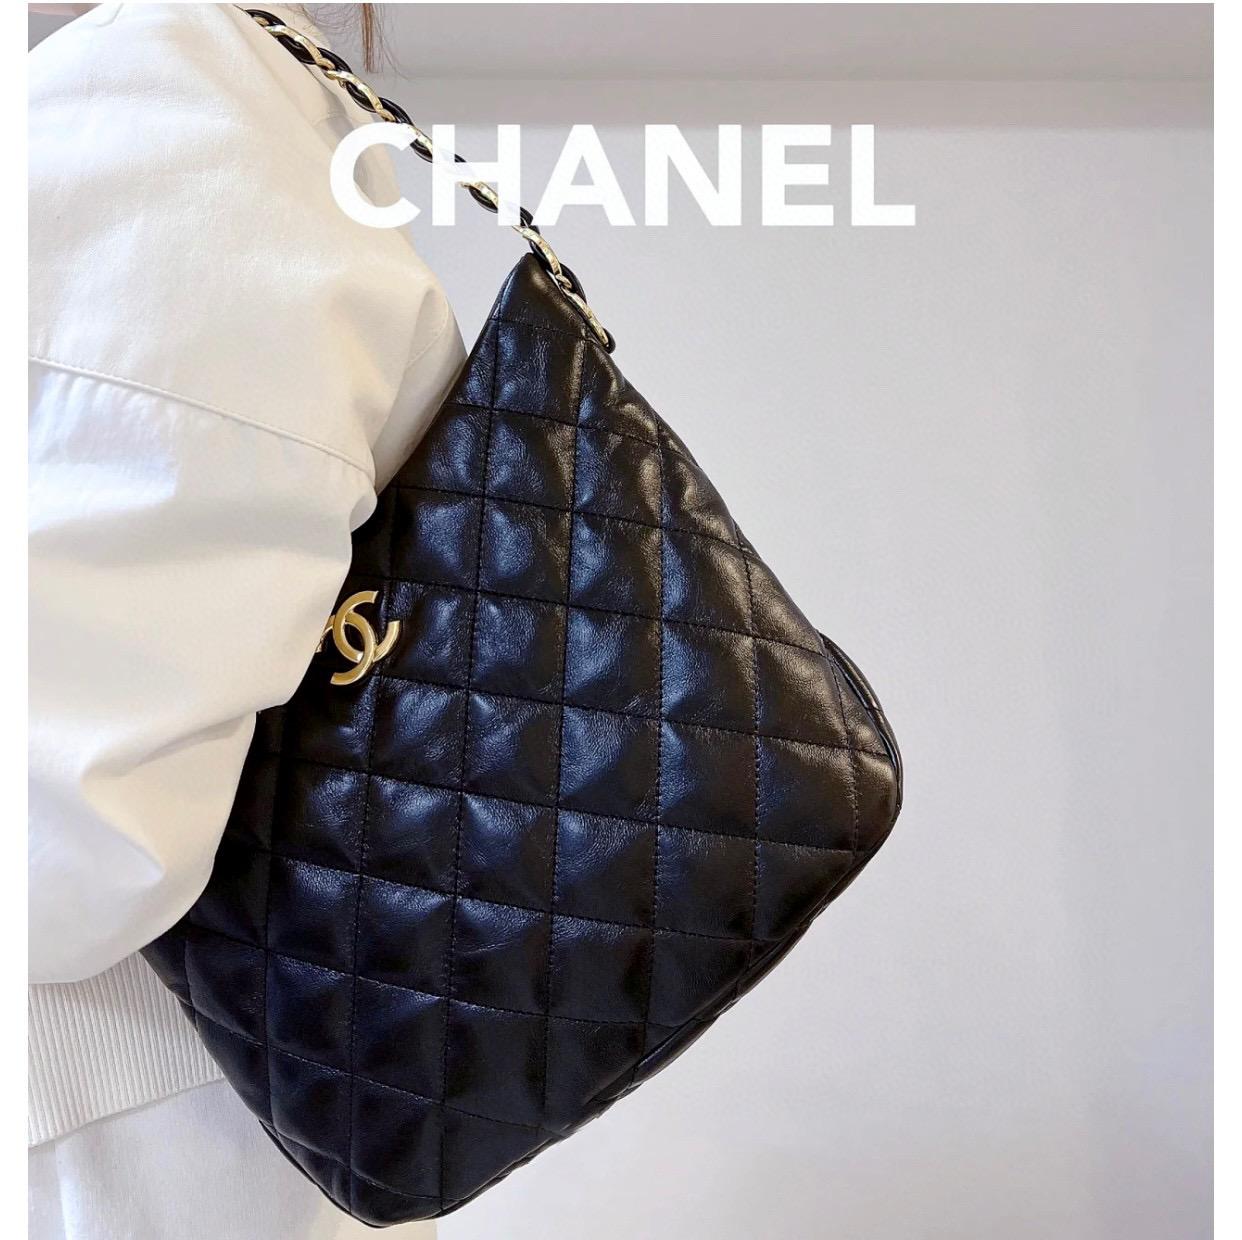 Chanel Fans Home Page on Instagram: 𝗖𝗛𝗔𝗡𝗘𝗟 𝟮𝟐𝑲 𝒉𝒐𝒃𝒐